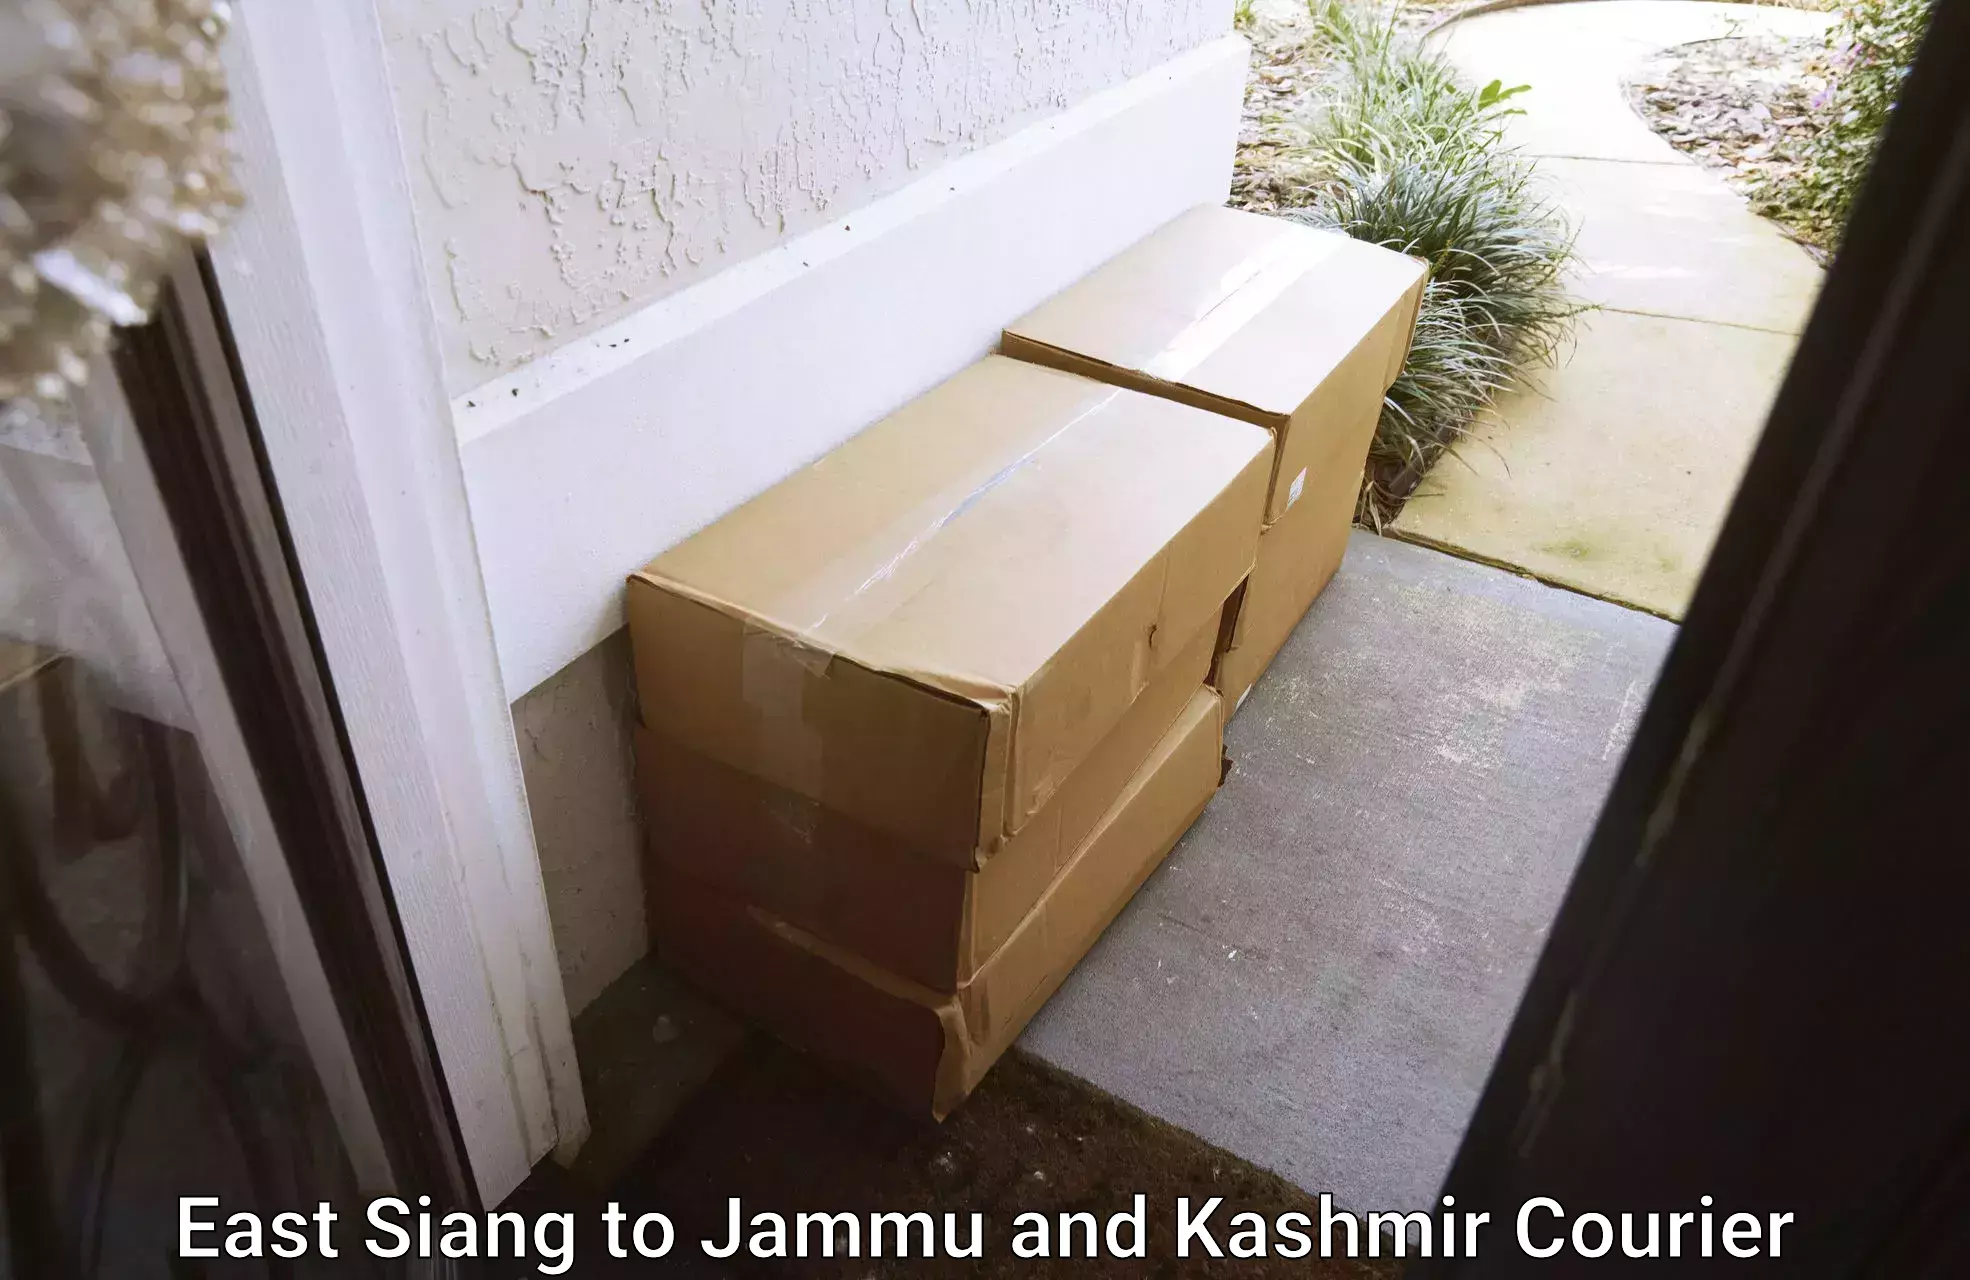 Reliable courier service East Siang to Jammu and Kashmir